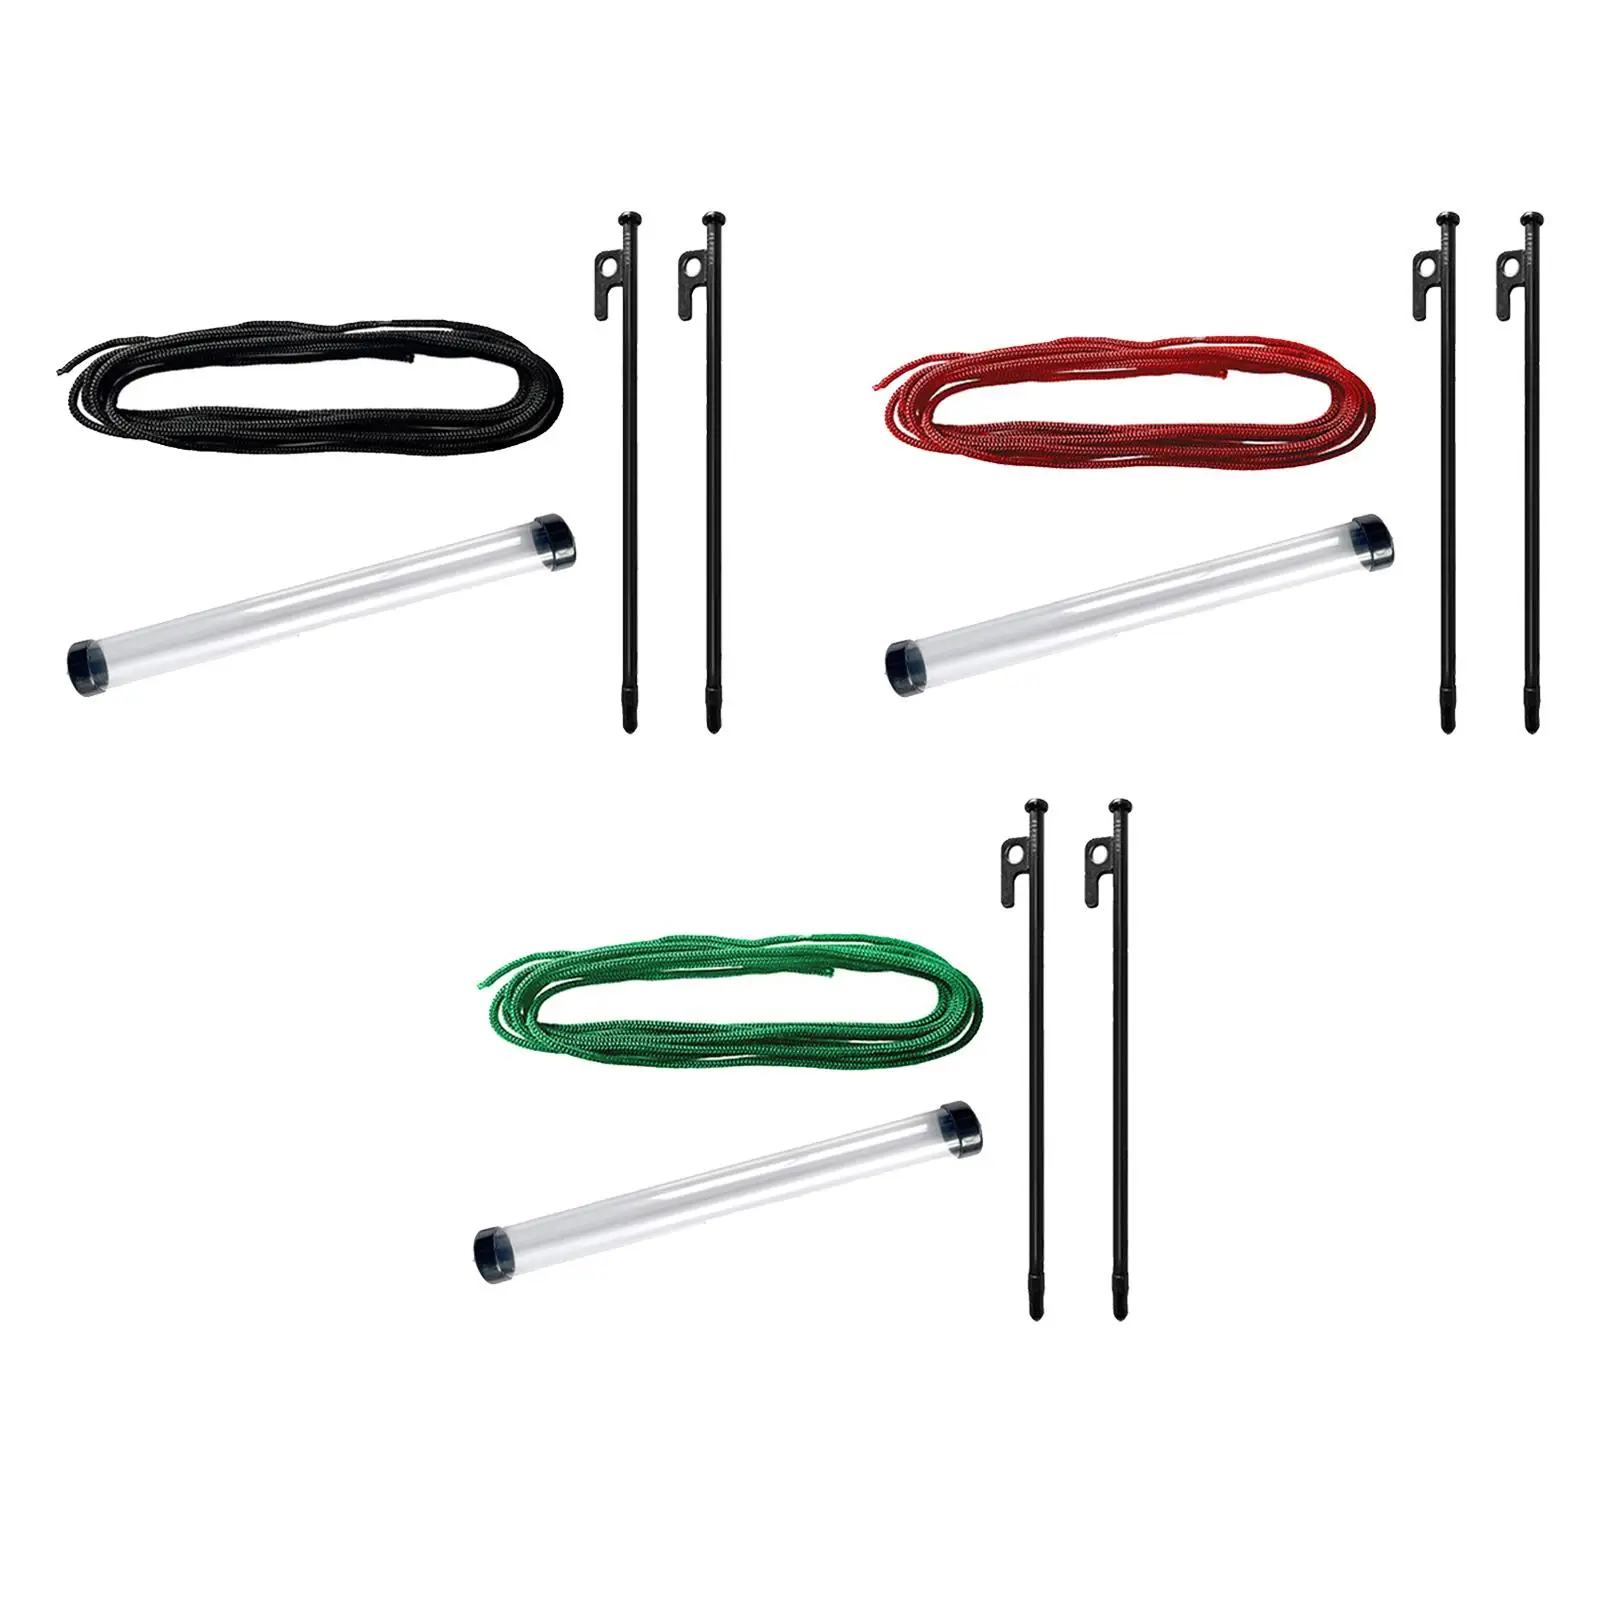 Golf Club Alignment Aid Golf Direction Indicator Swing Equipment for Golfer Putting